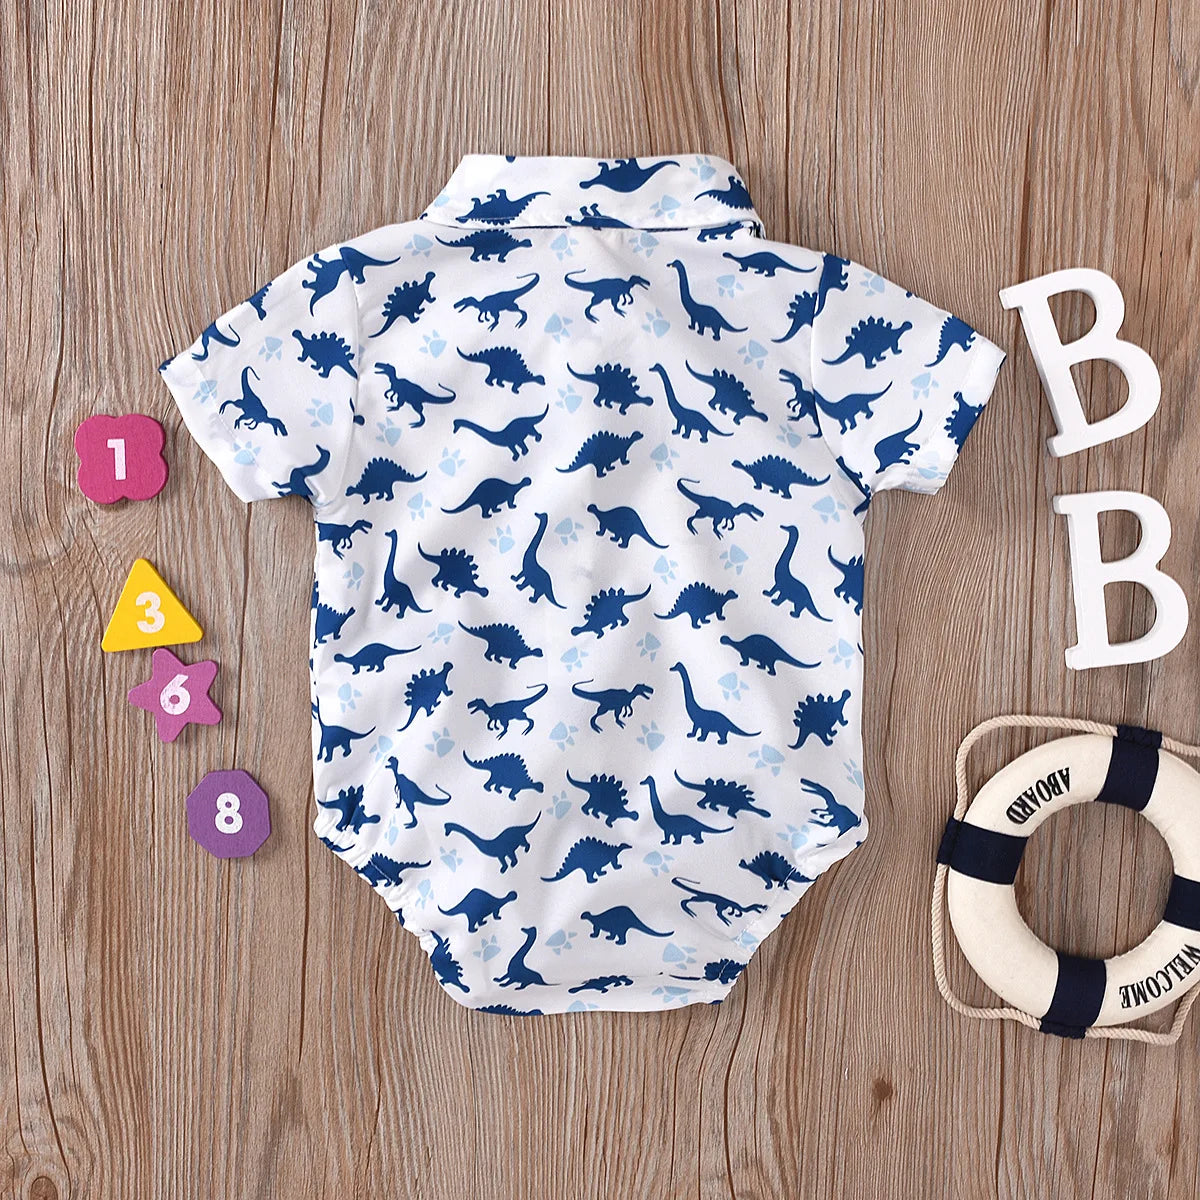 Baby Boy Clothes With Beret Newborn Baby Clothes 0 3 Months Summer Dinosaur Print Jumpsuit + Suspender Cotton Shorts Kid Outfit